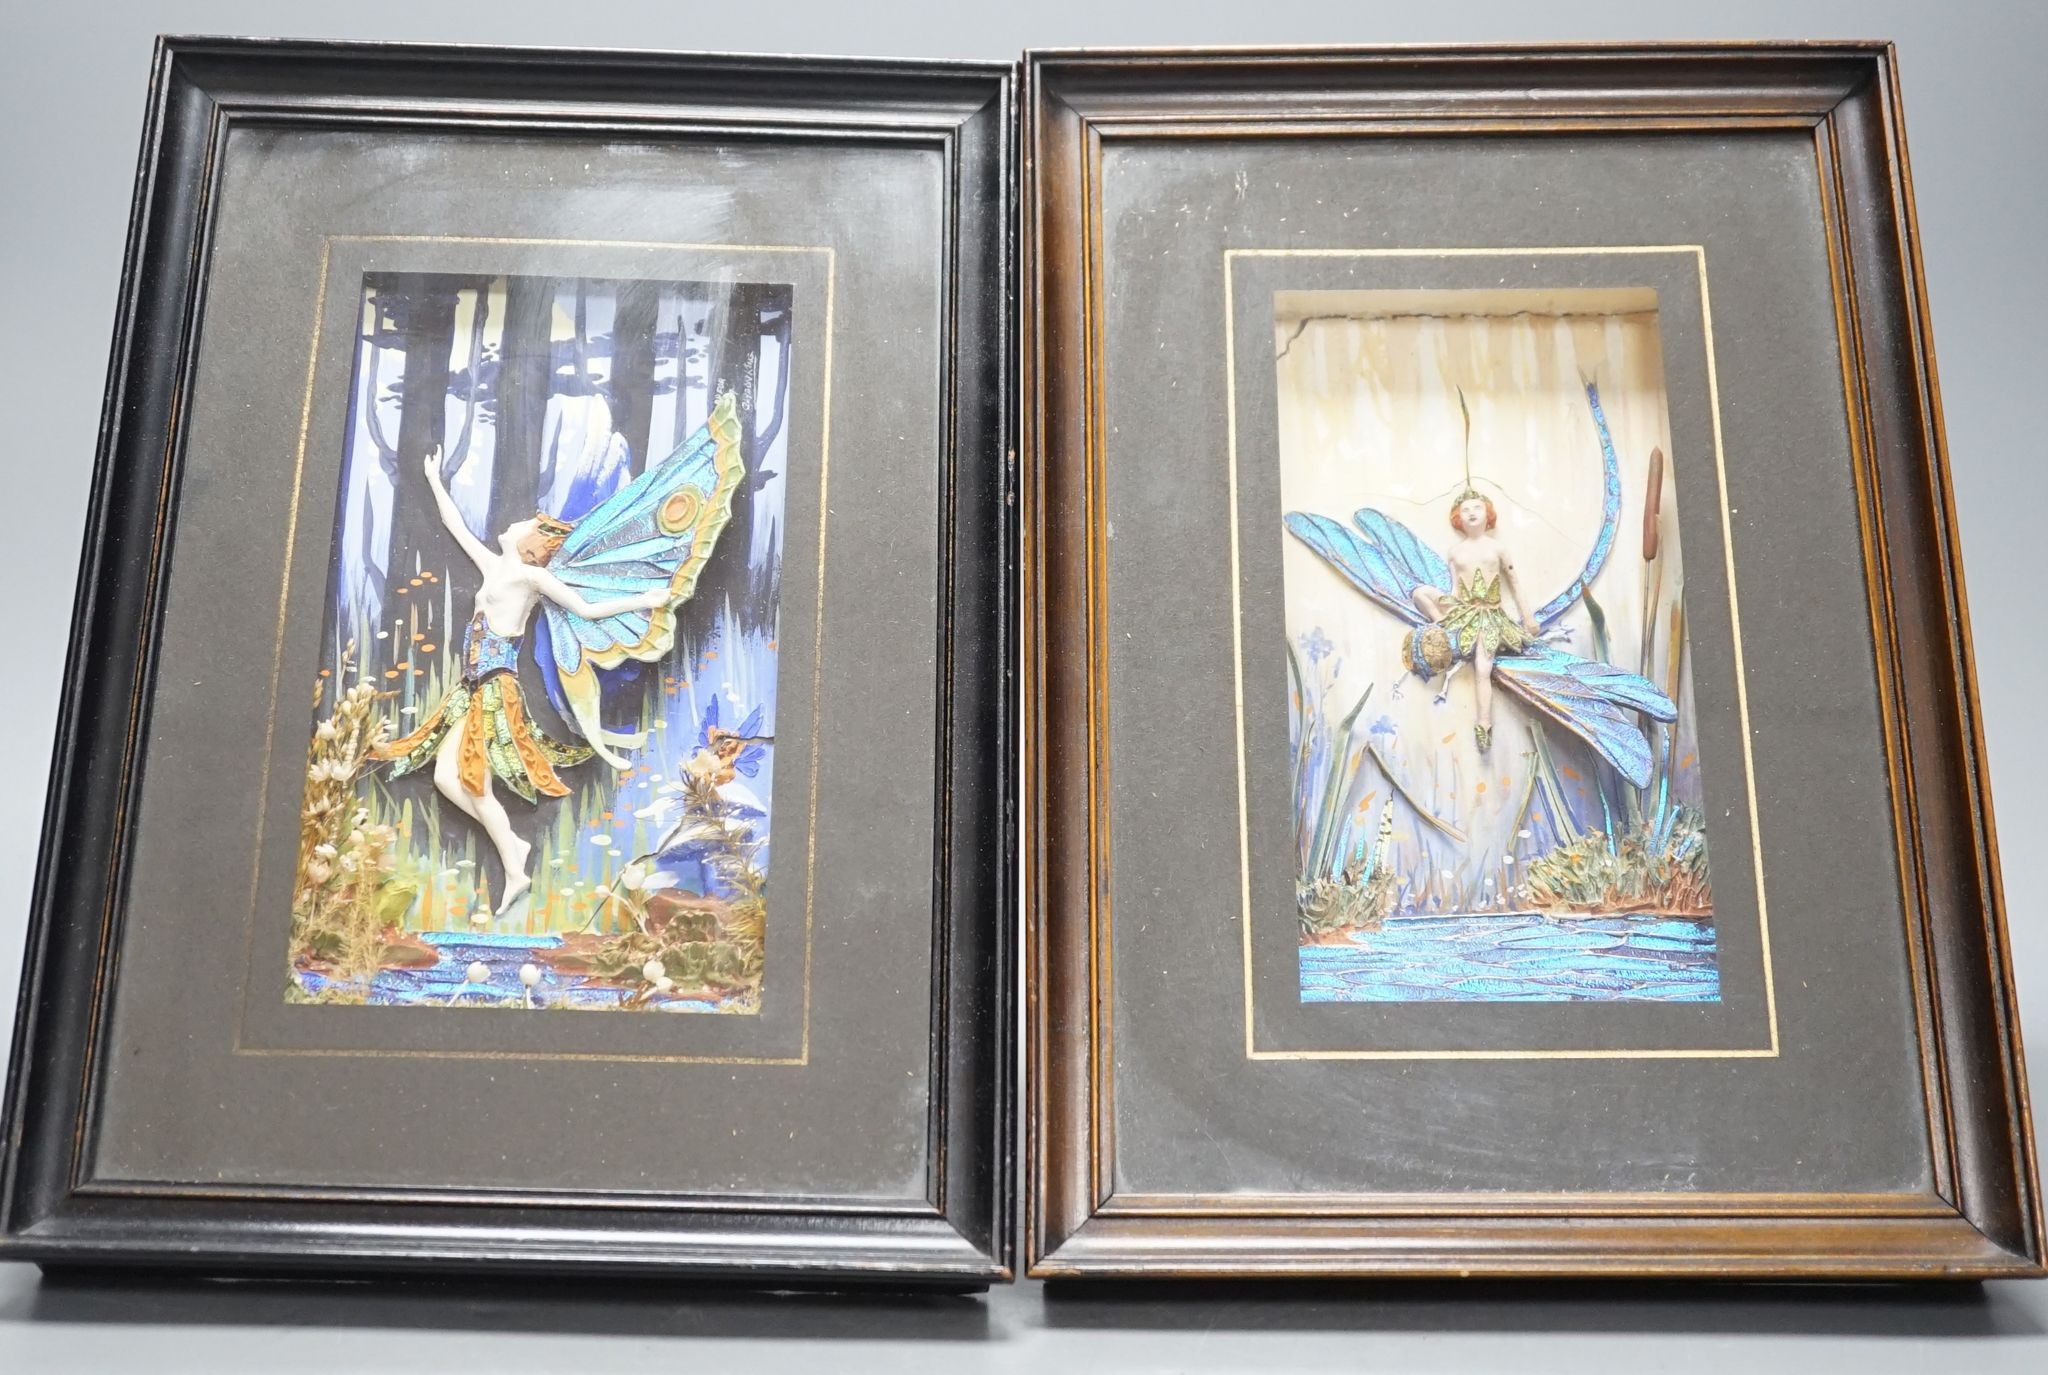 A pair of morpho butterfly wing nymph diorama, signed Gaydon King, Pat. App. For 19907/29, c.